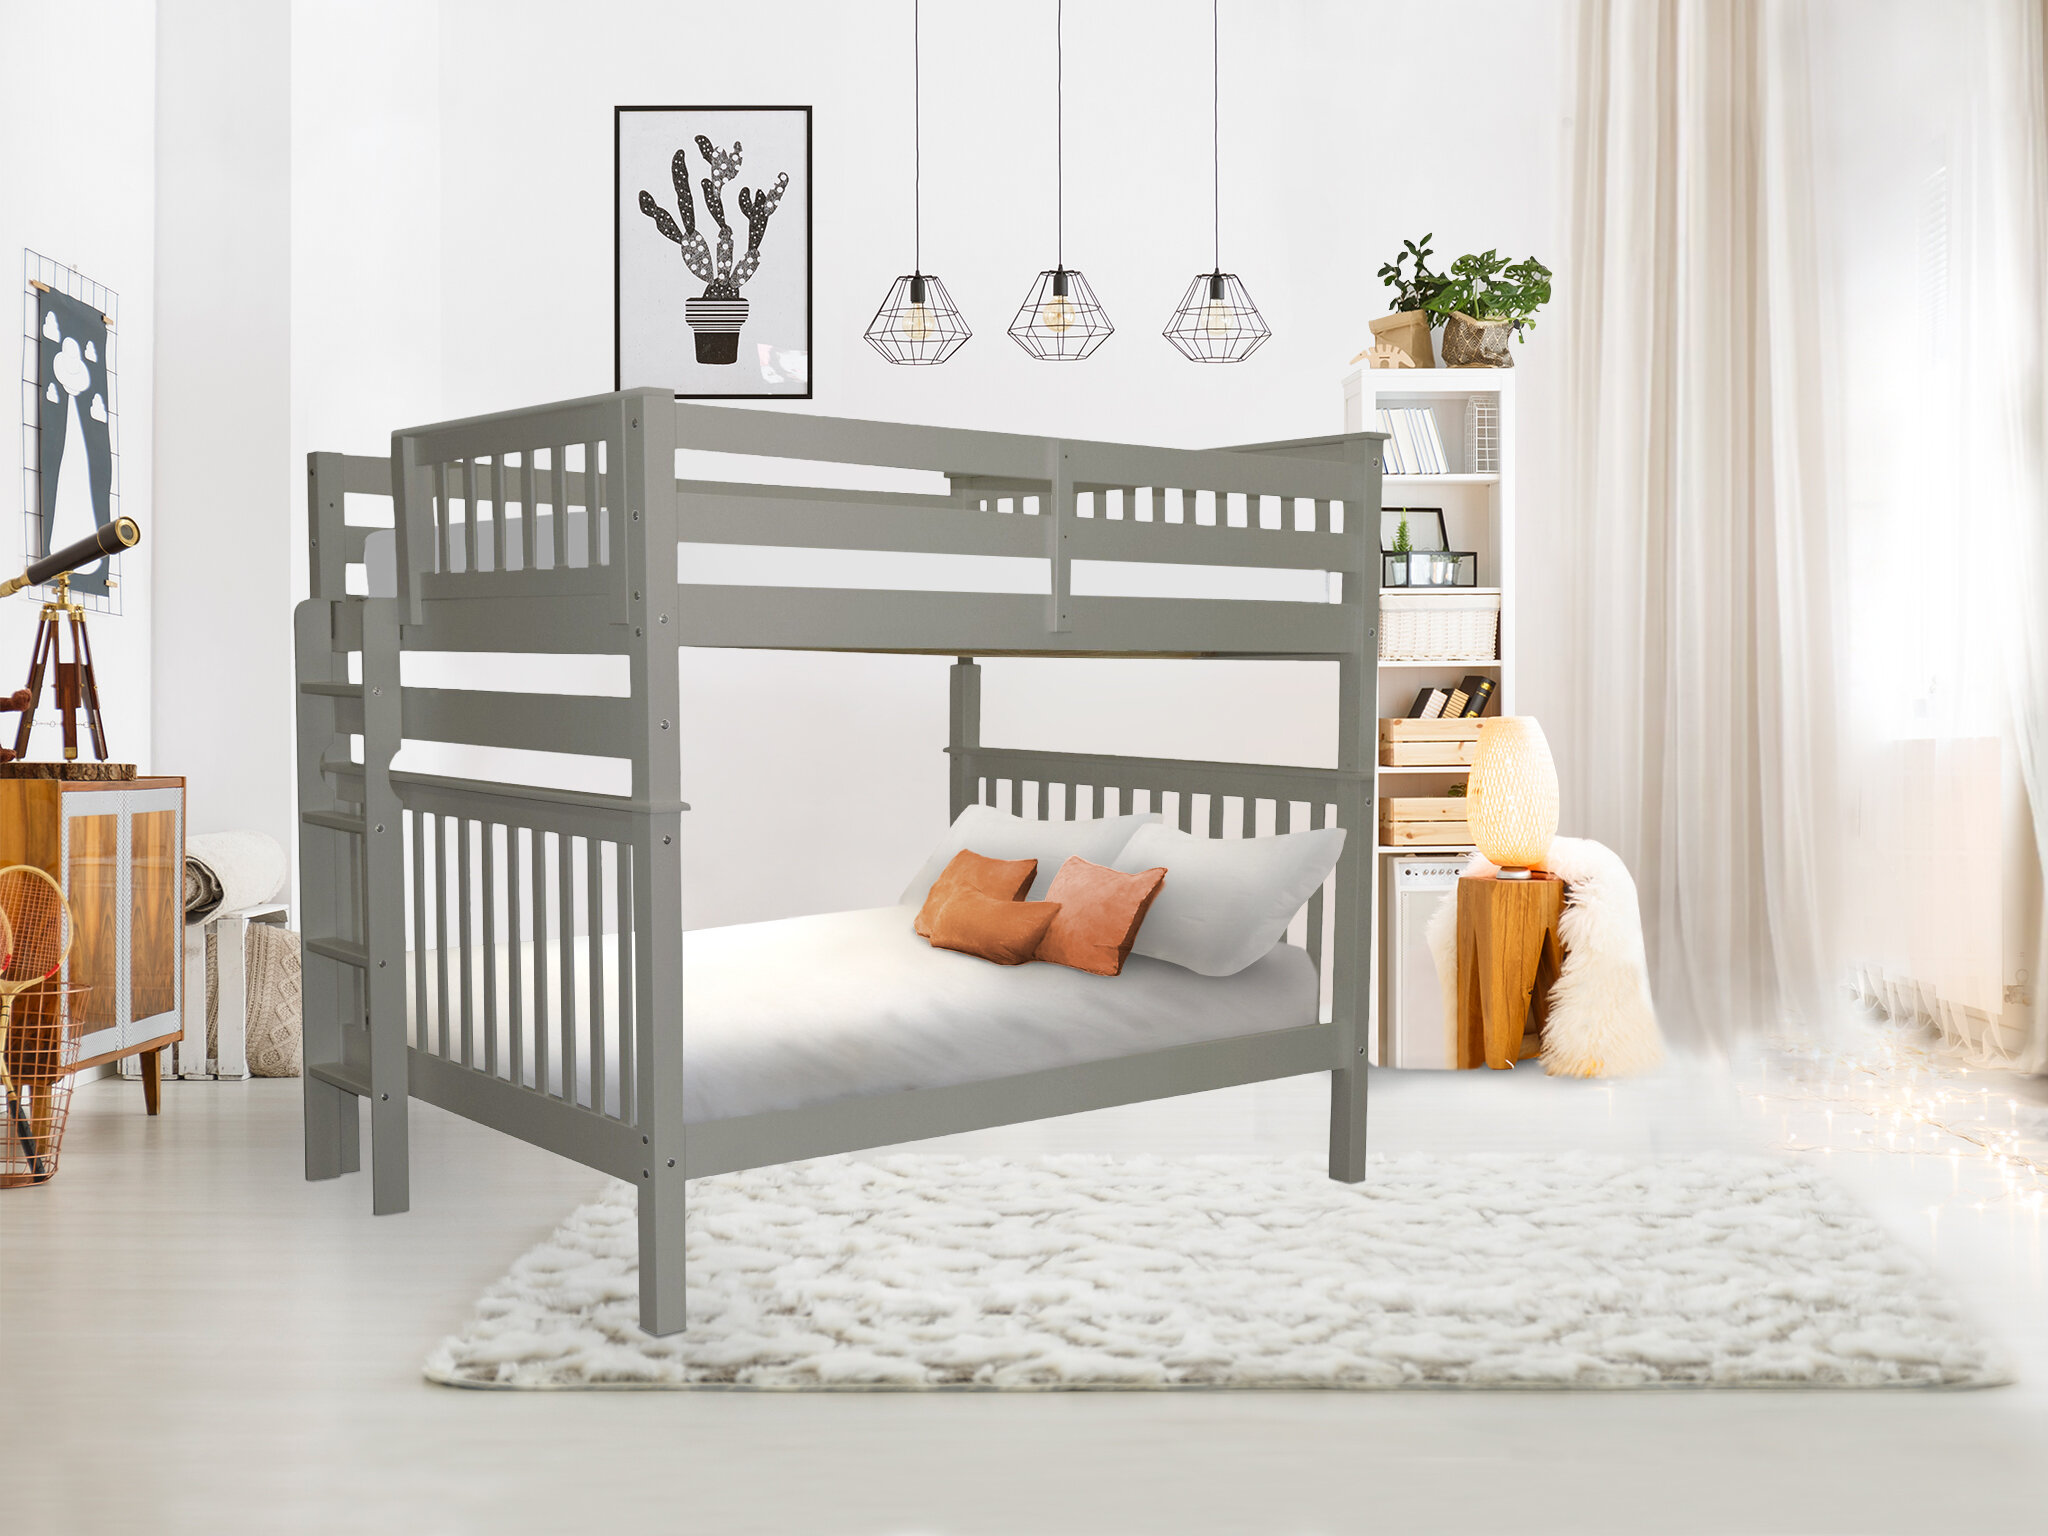 MODERN BEDROOM KIDS YOUTH DOUBLE BUNK BED BEDDING CONTAINER STORAGE GLOSS 